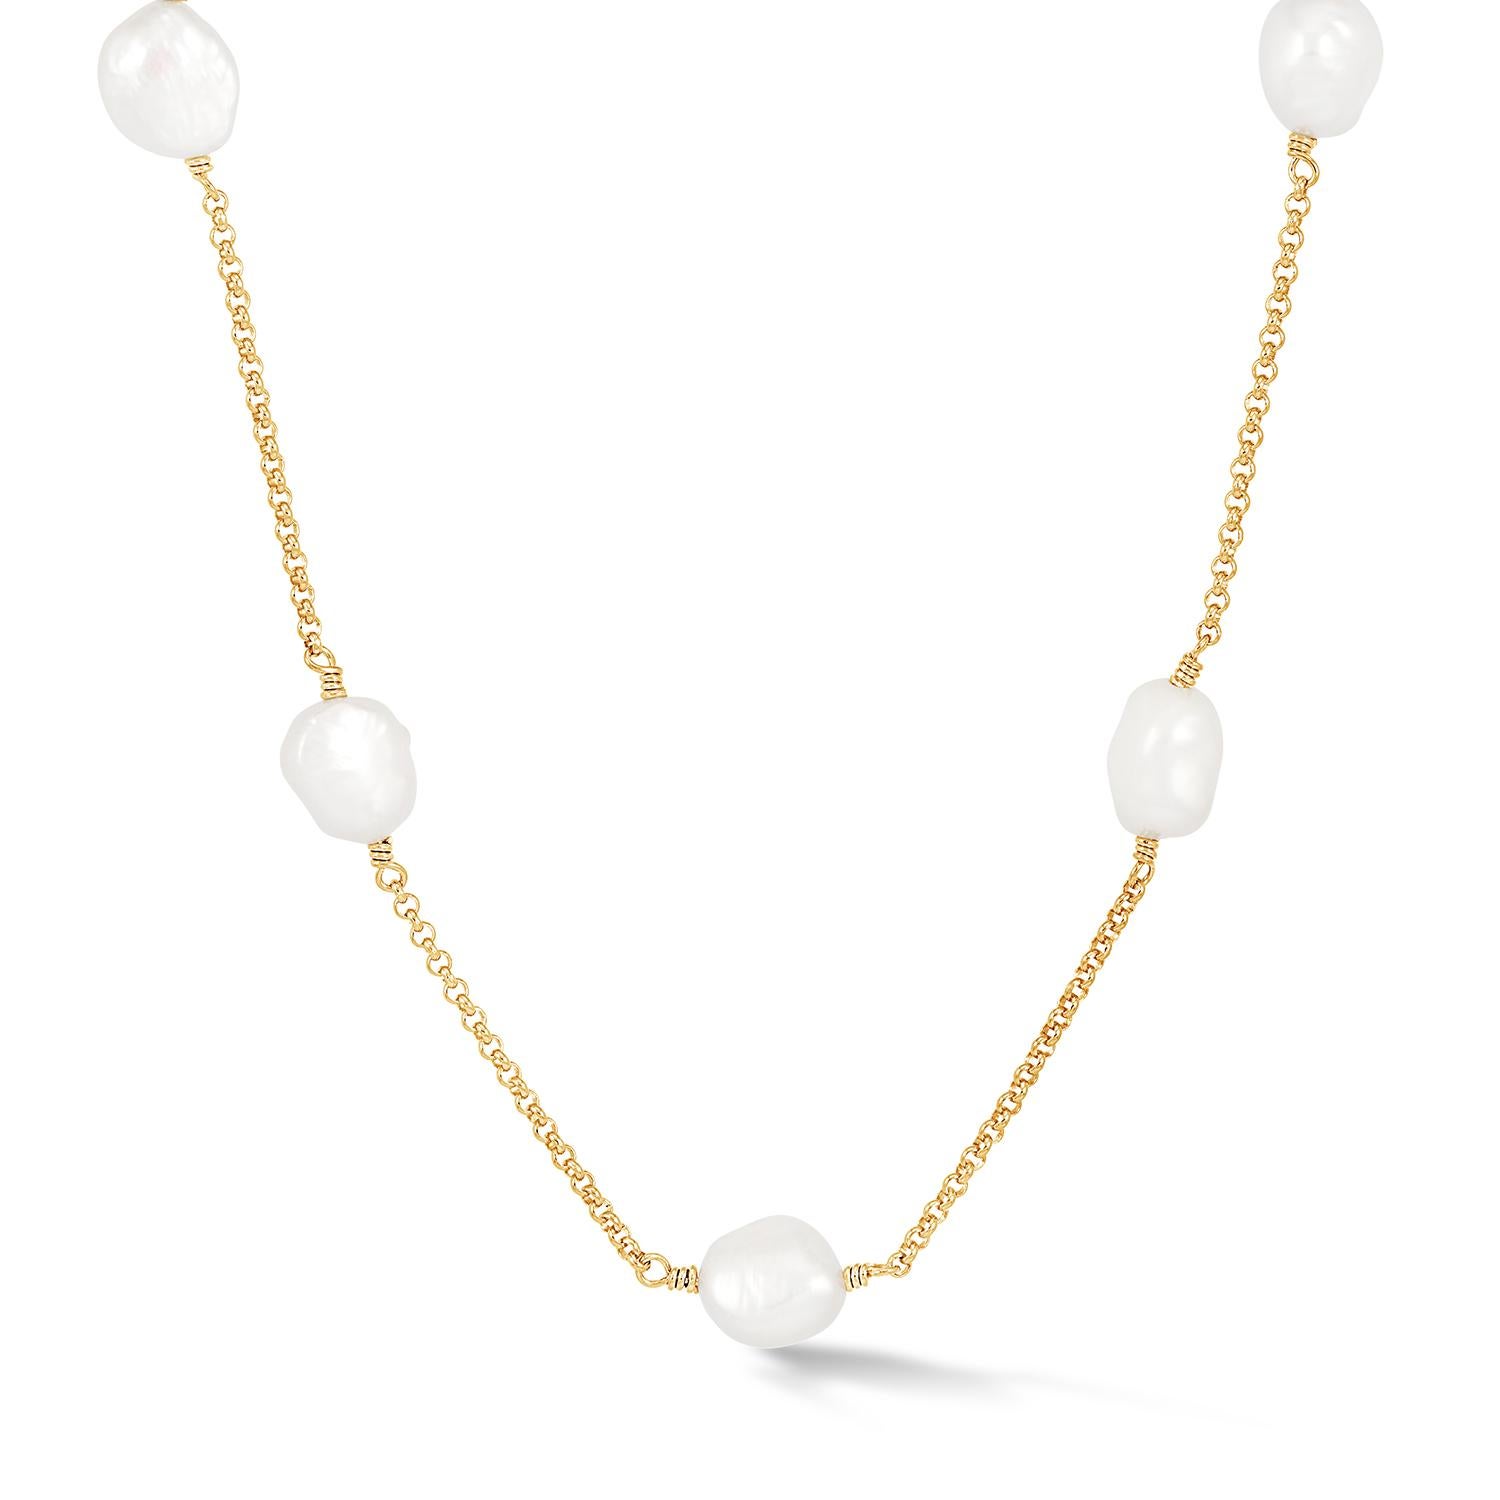 Made in our London studio, this sterling silver long necklace features large, lustrous white baroque freshwater pearls suspended on fine chain. Baroque pearls are naturally irregular in shape and known for their one-of-a-kind nature. 

The 40 inch